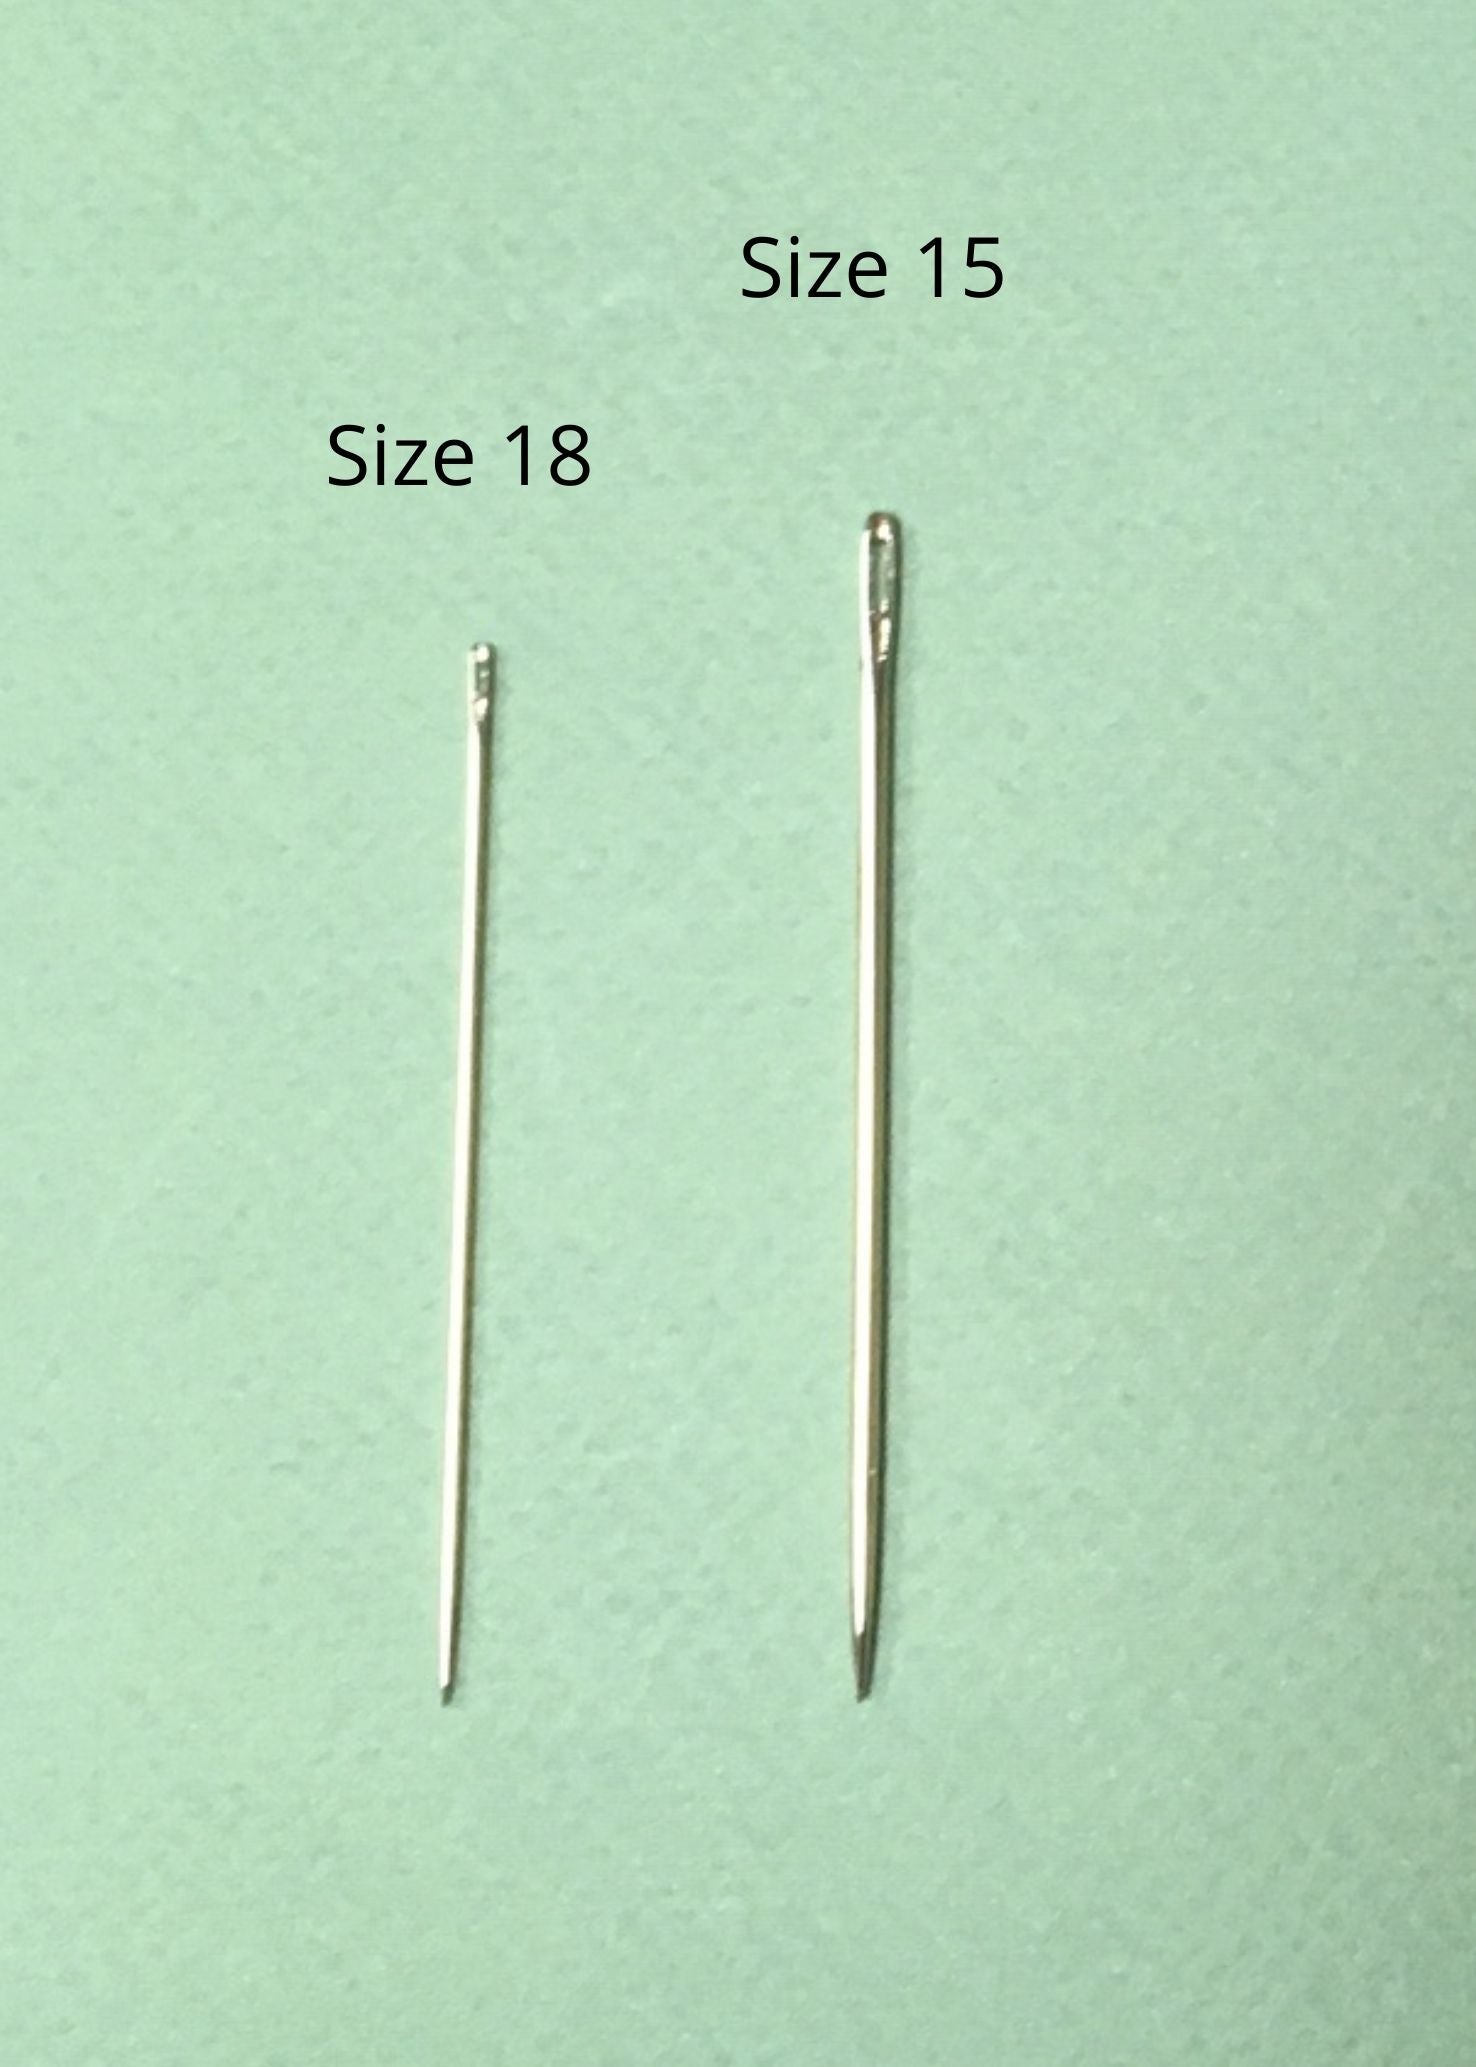 Bookbinders Sewing Needle : Size 18